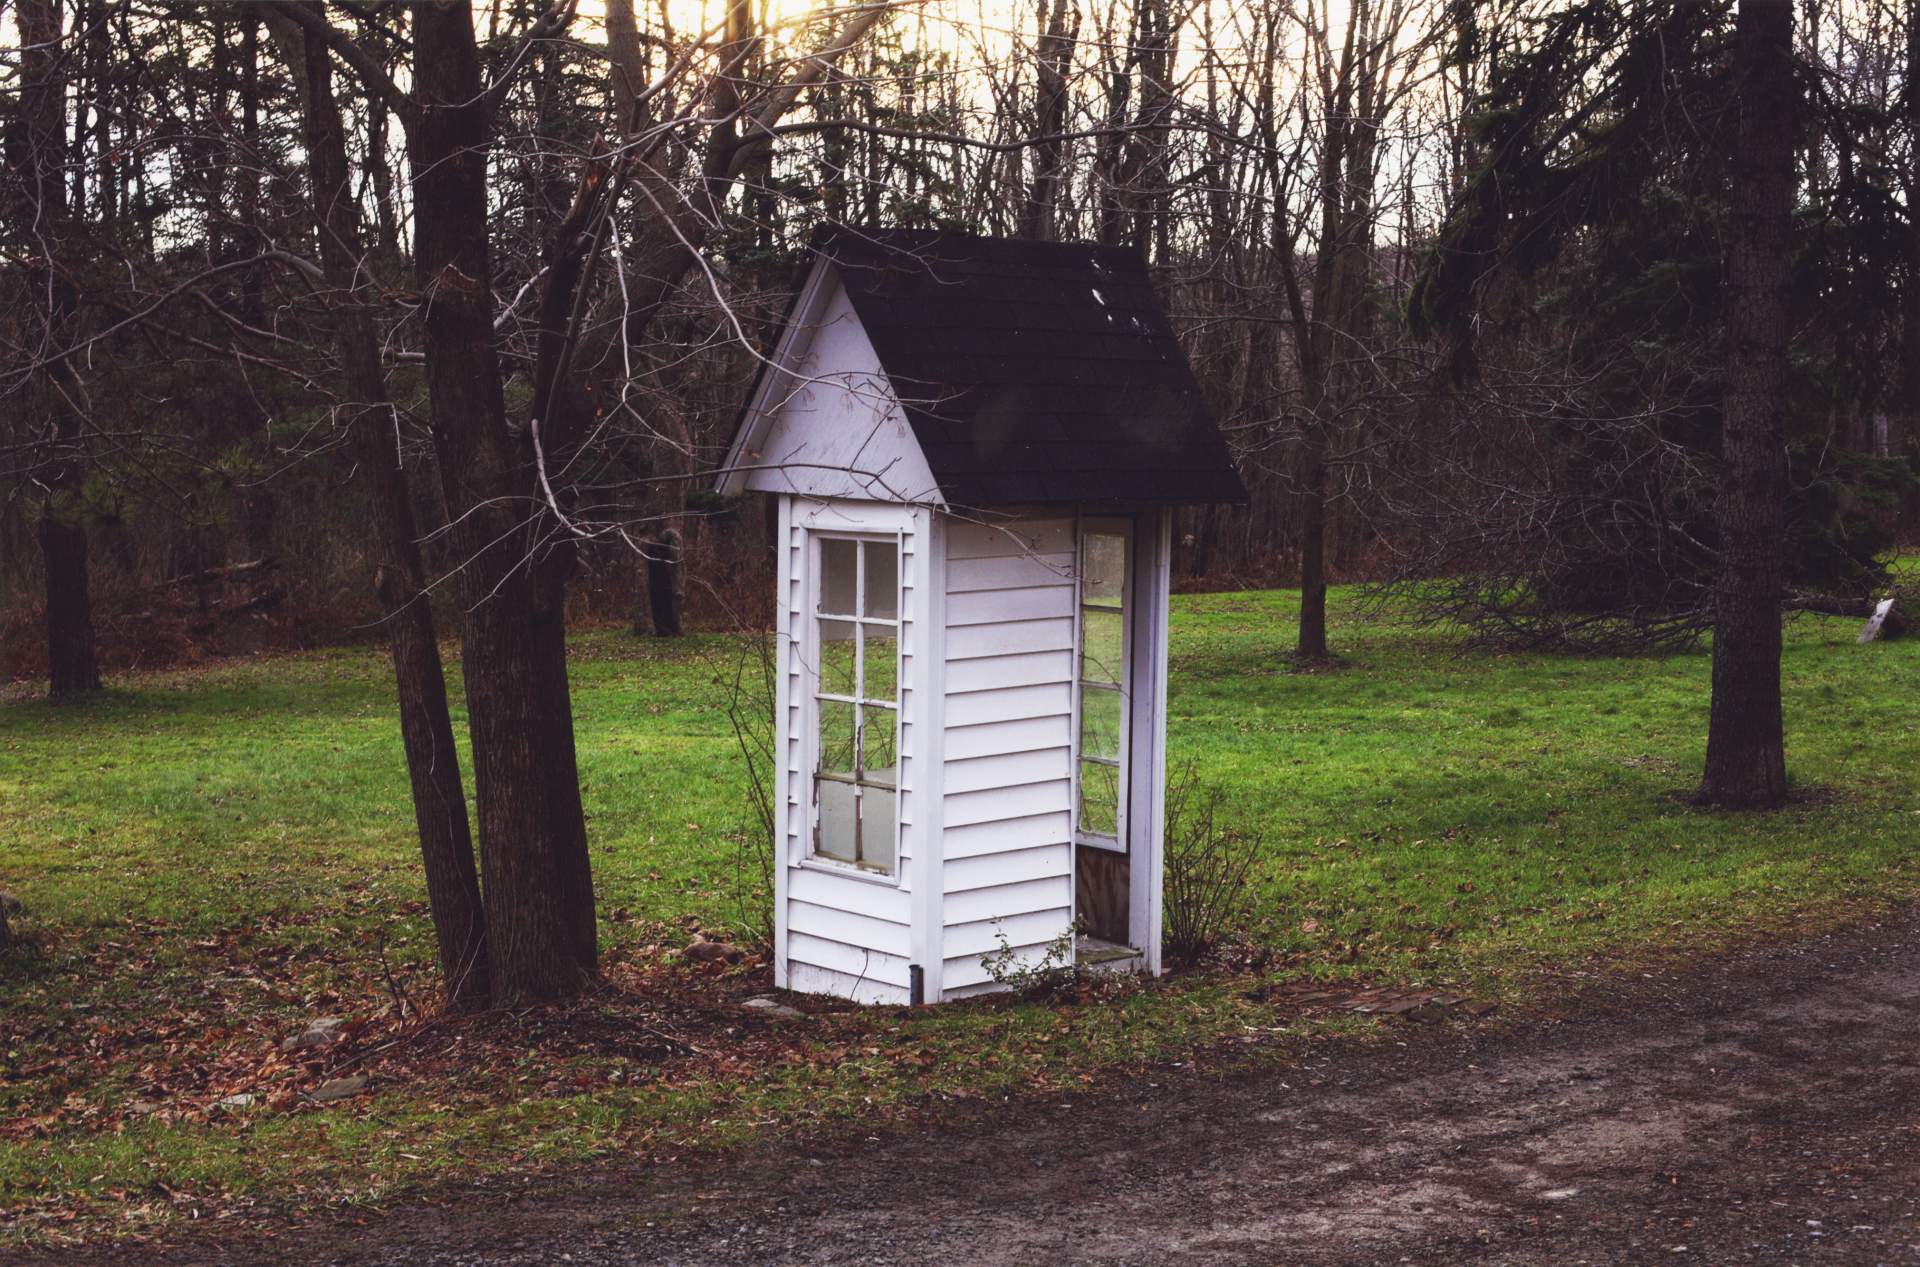 The Mistake by the Lake [white shelter with windows and black roof]